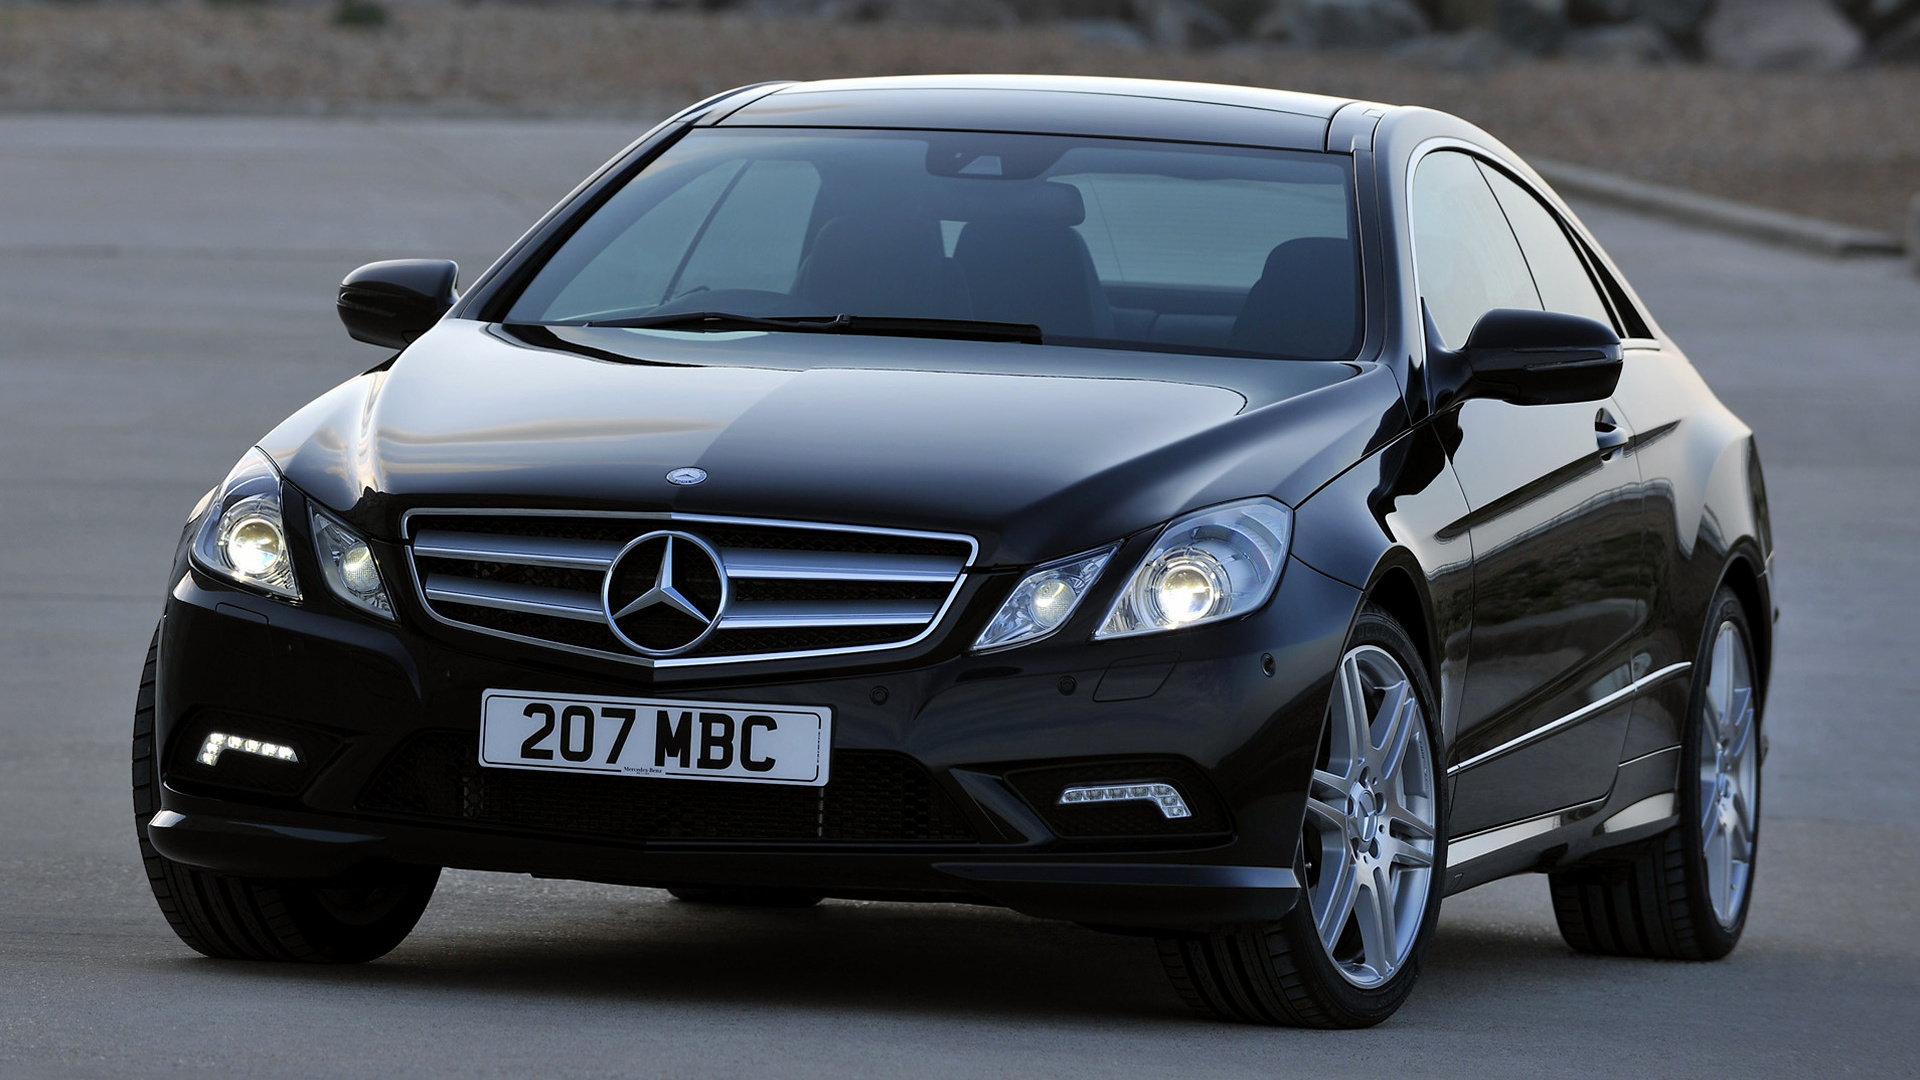 Black Car Car Coupe Luxury Car Mercedes Benz E 500 Coupe Amg Styling 1920x1080